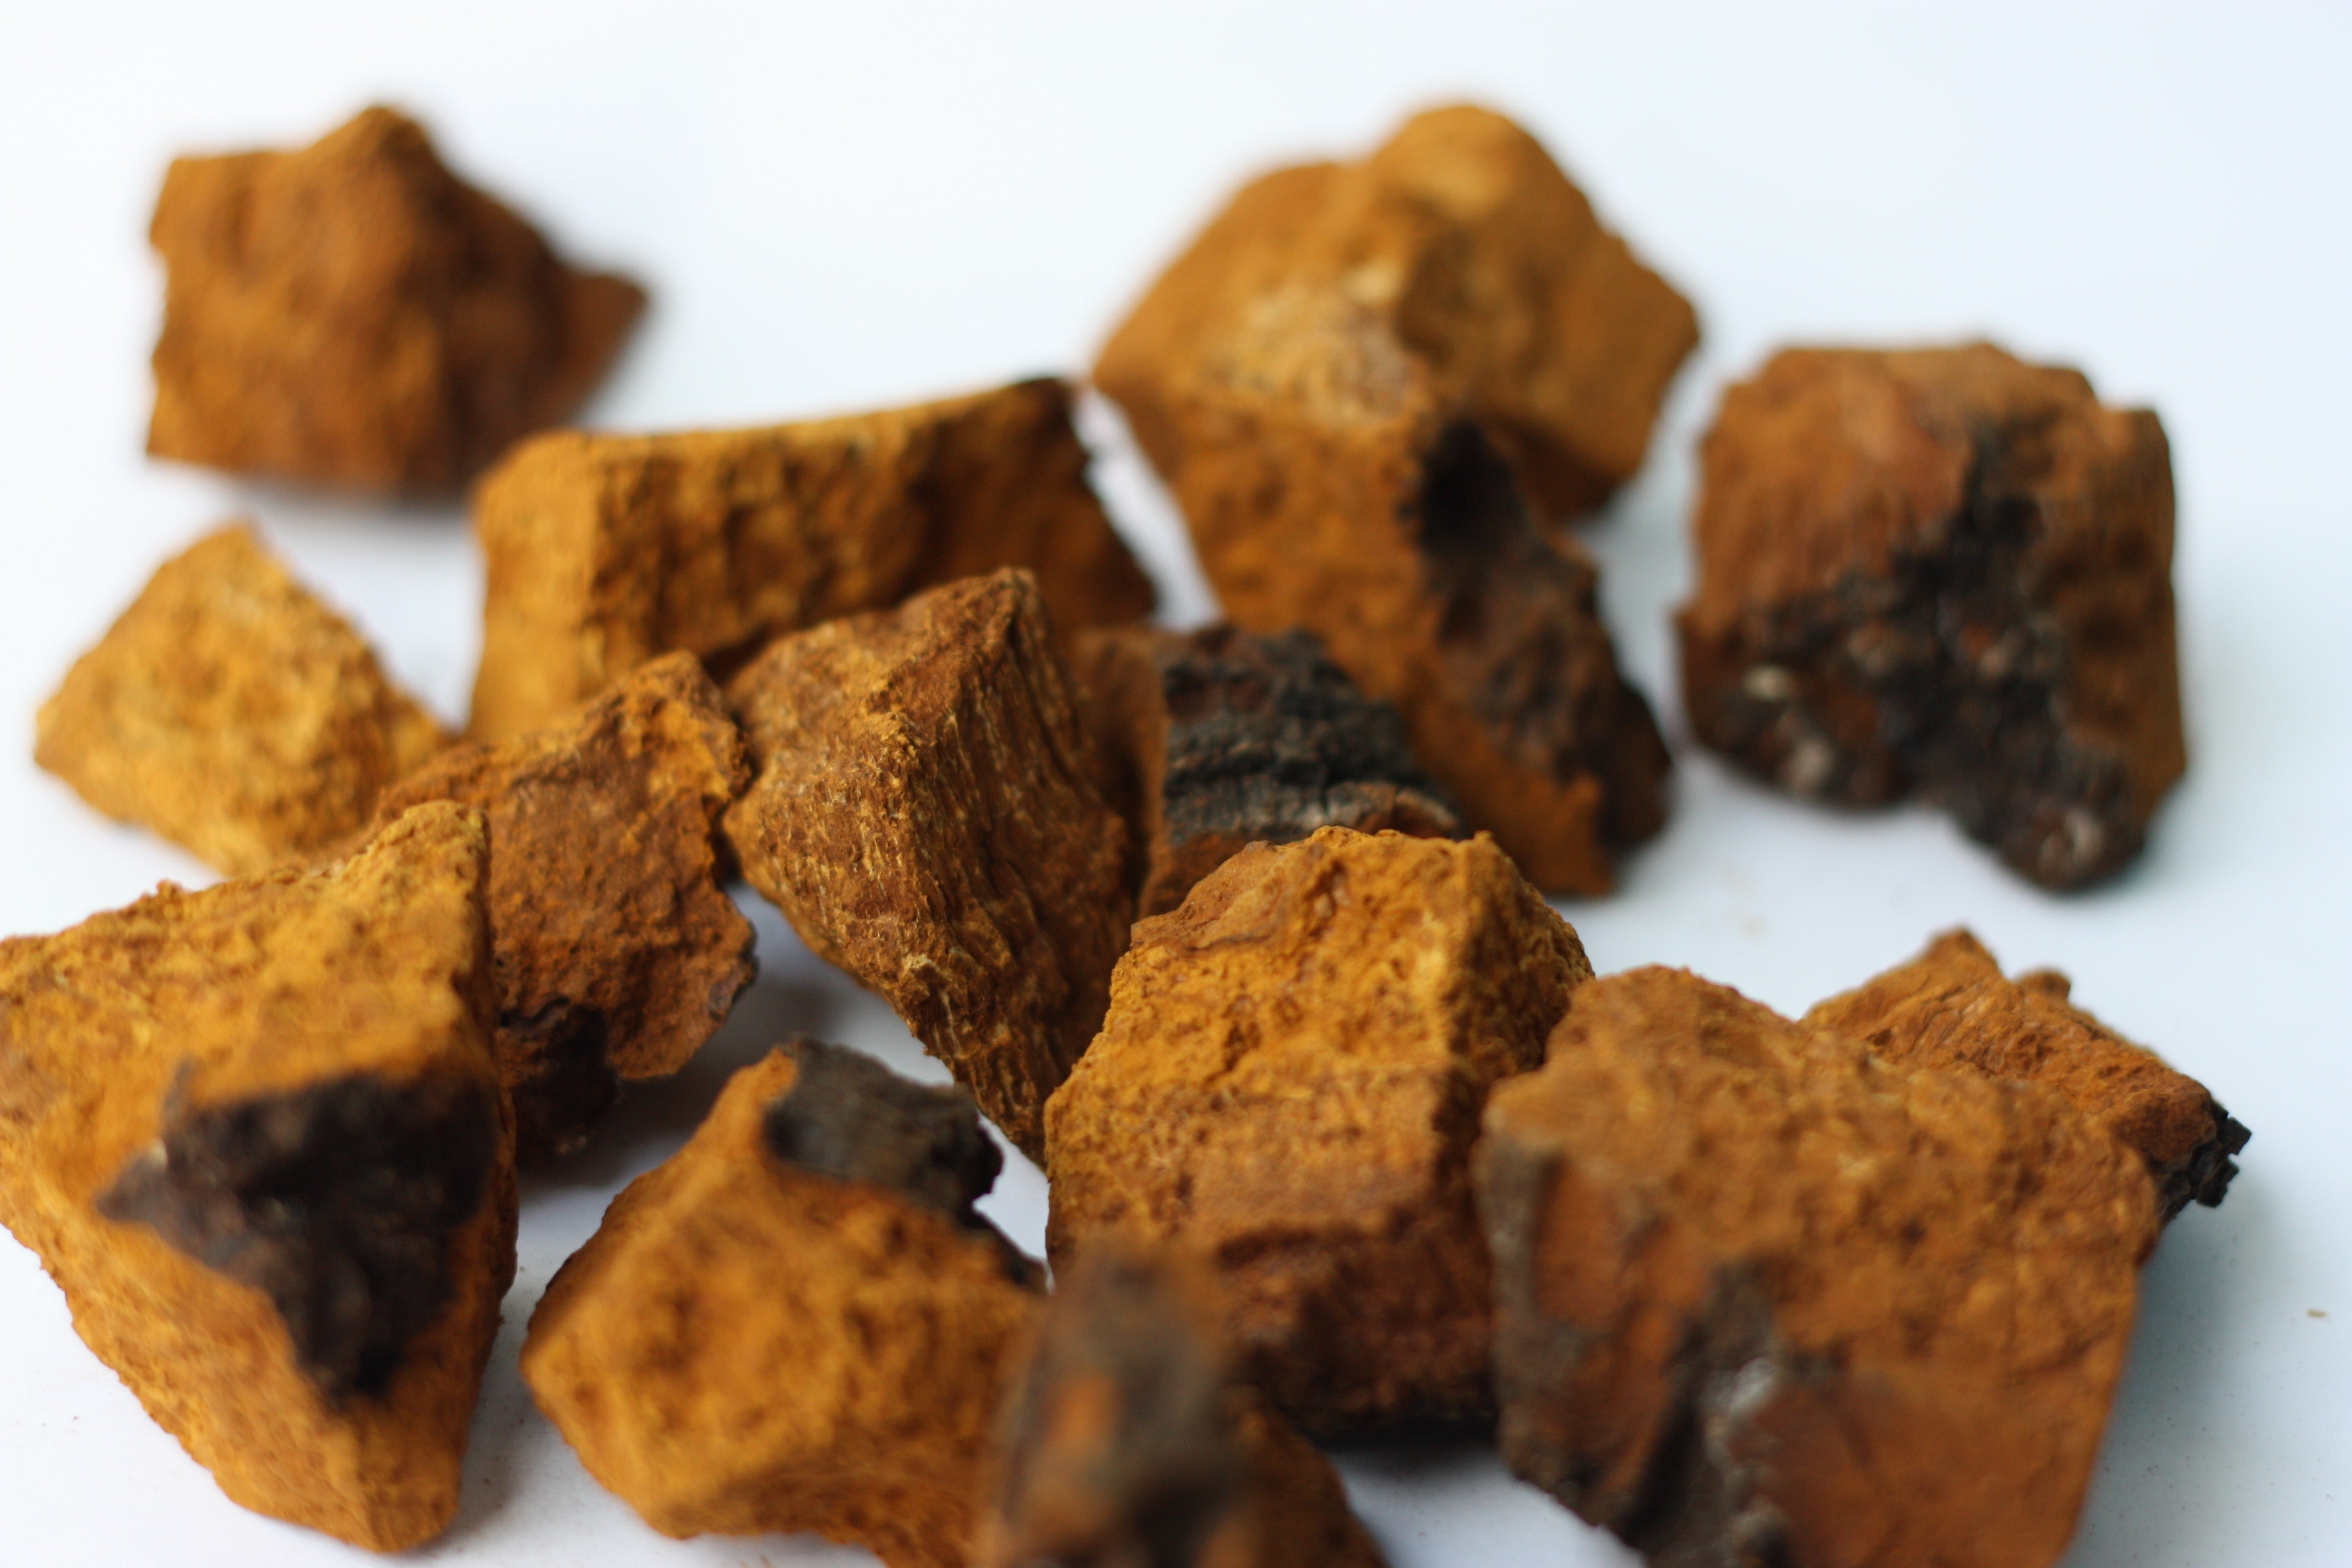 How to Prepare Chaga Tea (With Exclusive Recipes)